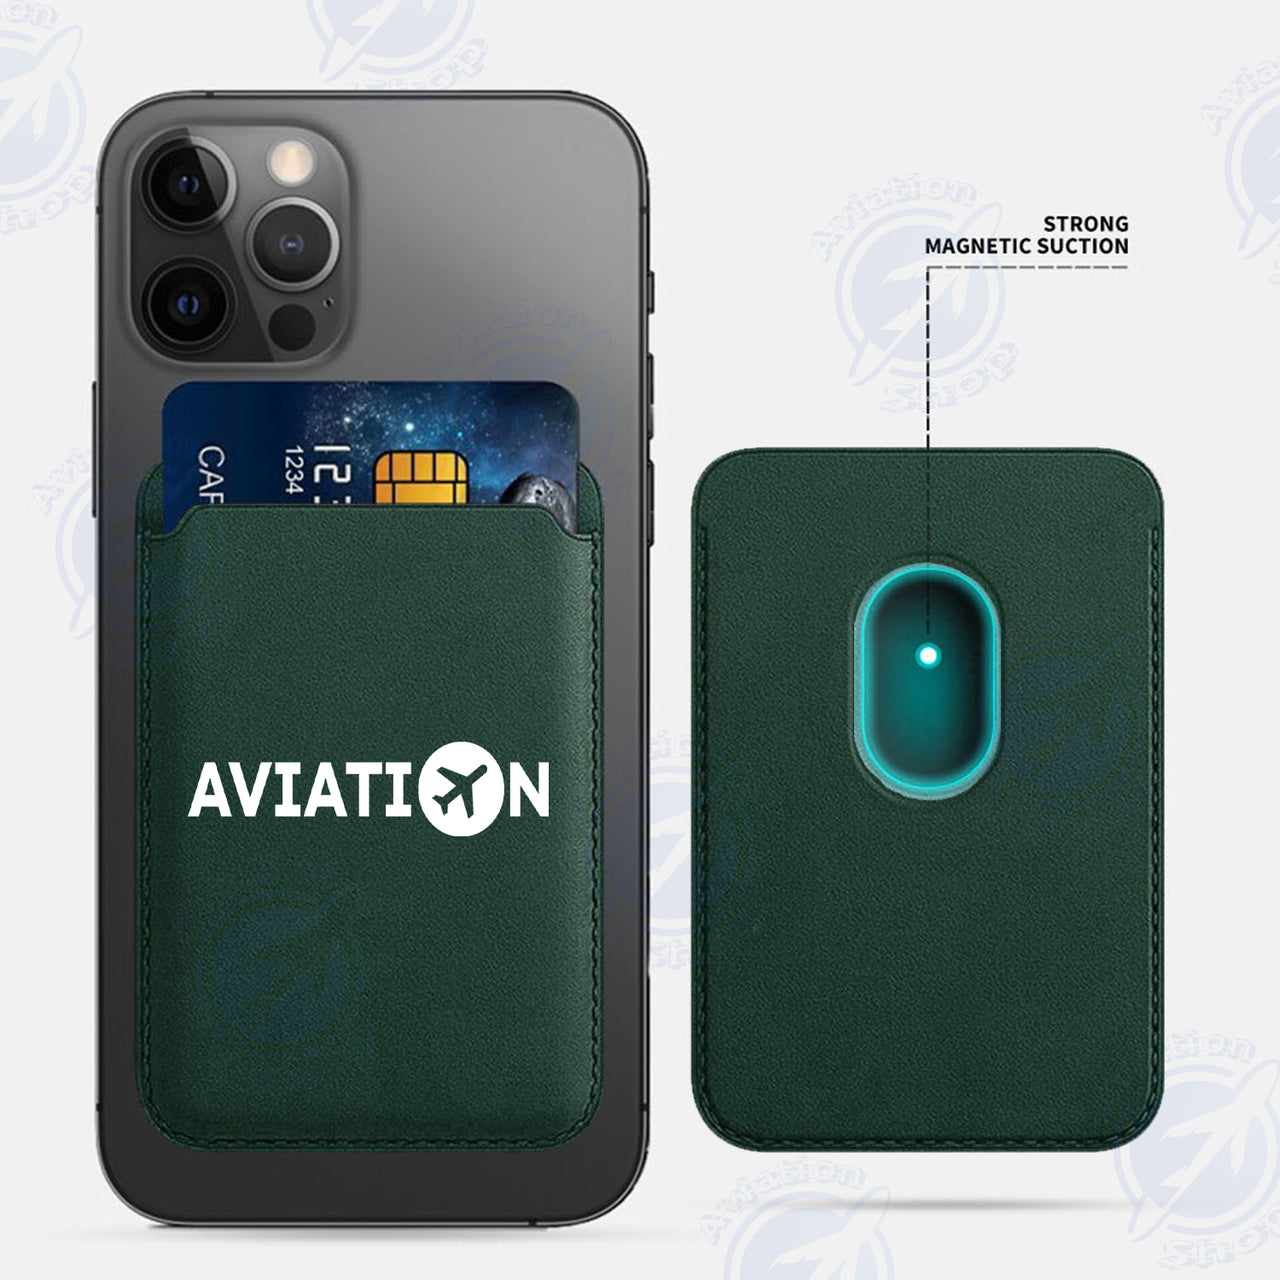 Aviation iPhone Cases Magnetic Card Wallet